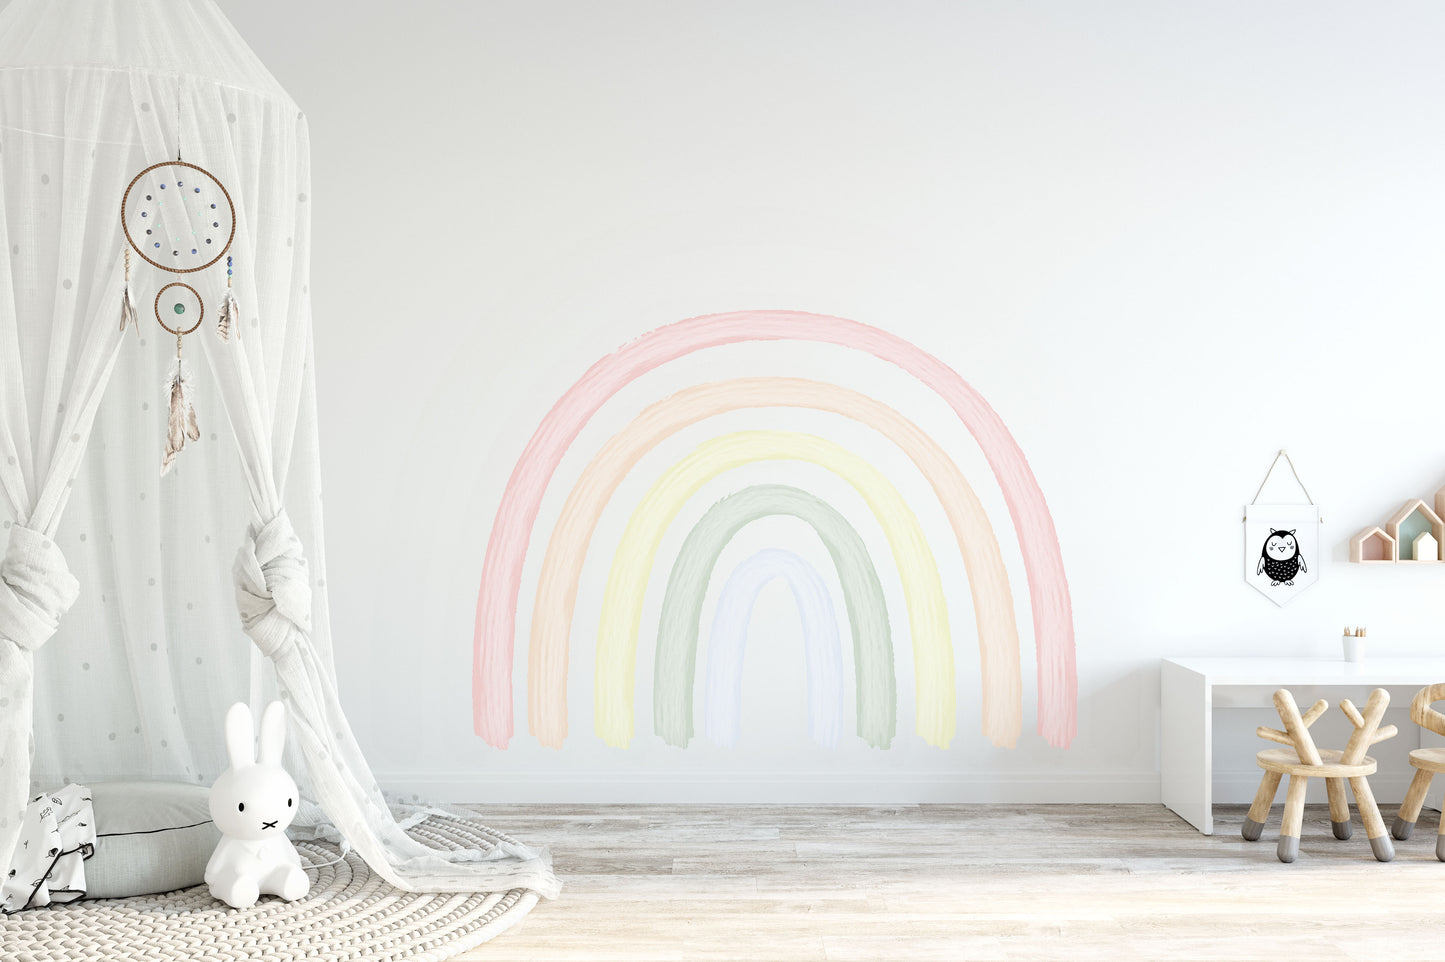 Giant Rainbow Wall Decal - Wall Decals Australia - Fable and Fawn 